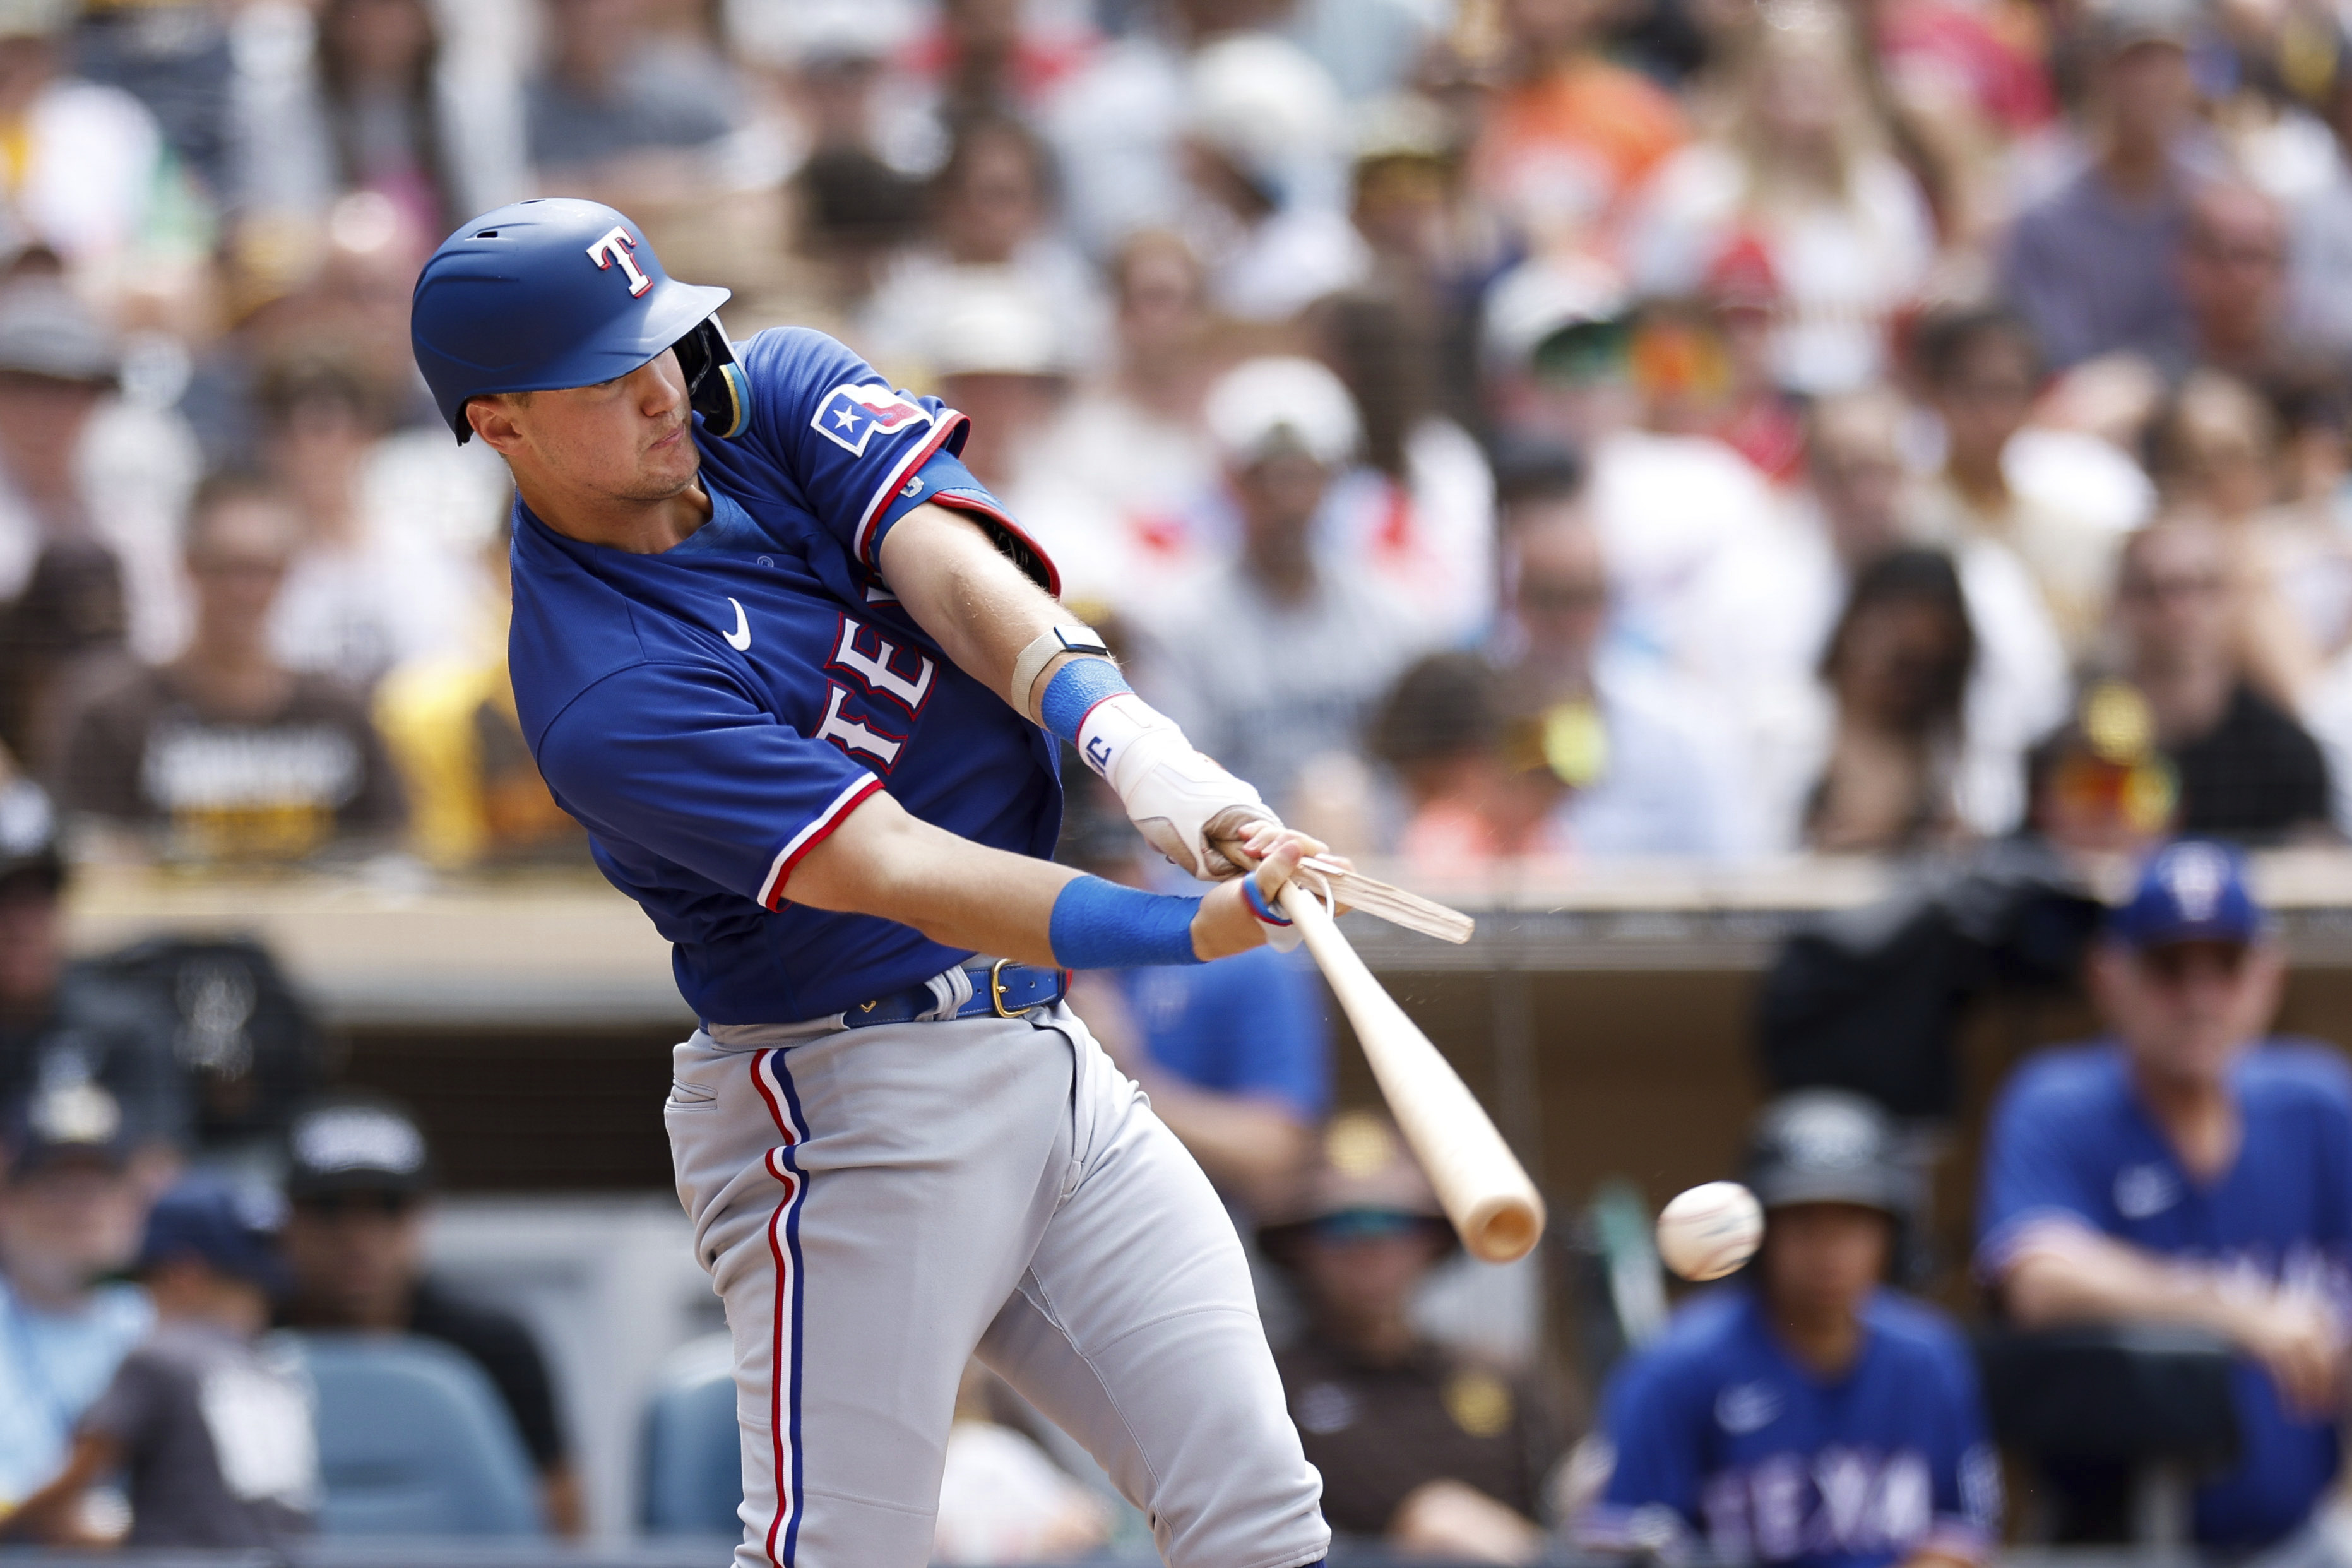 Goals have changed for Rangers third baseman Josh Jung. Now he aims to  'beat the clock